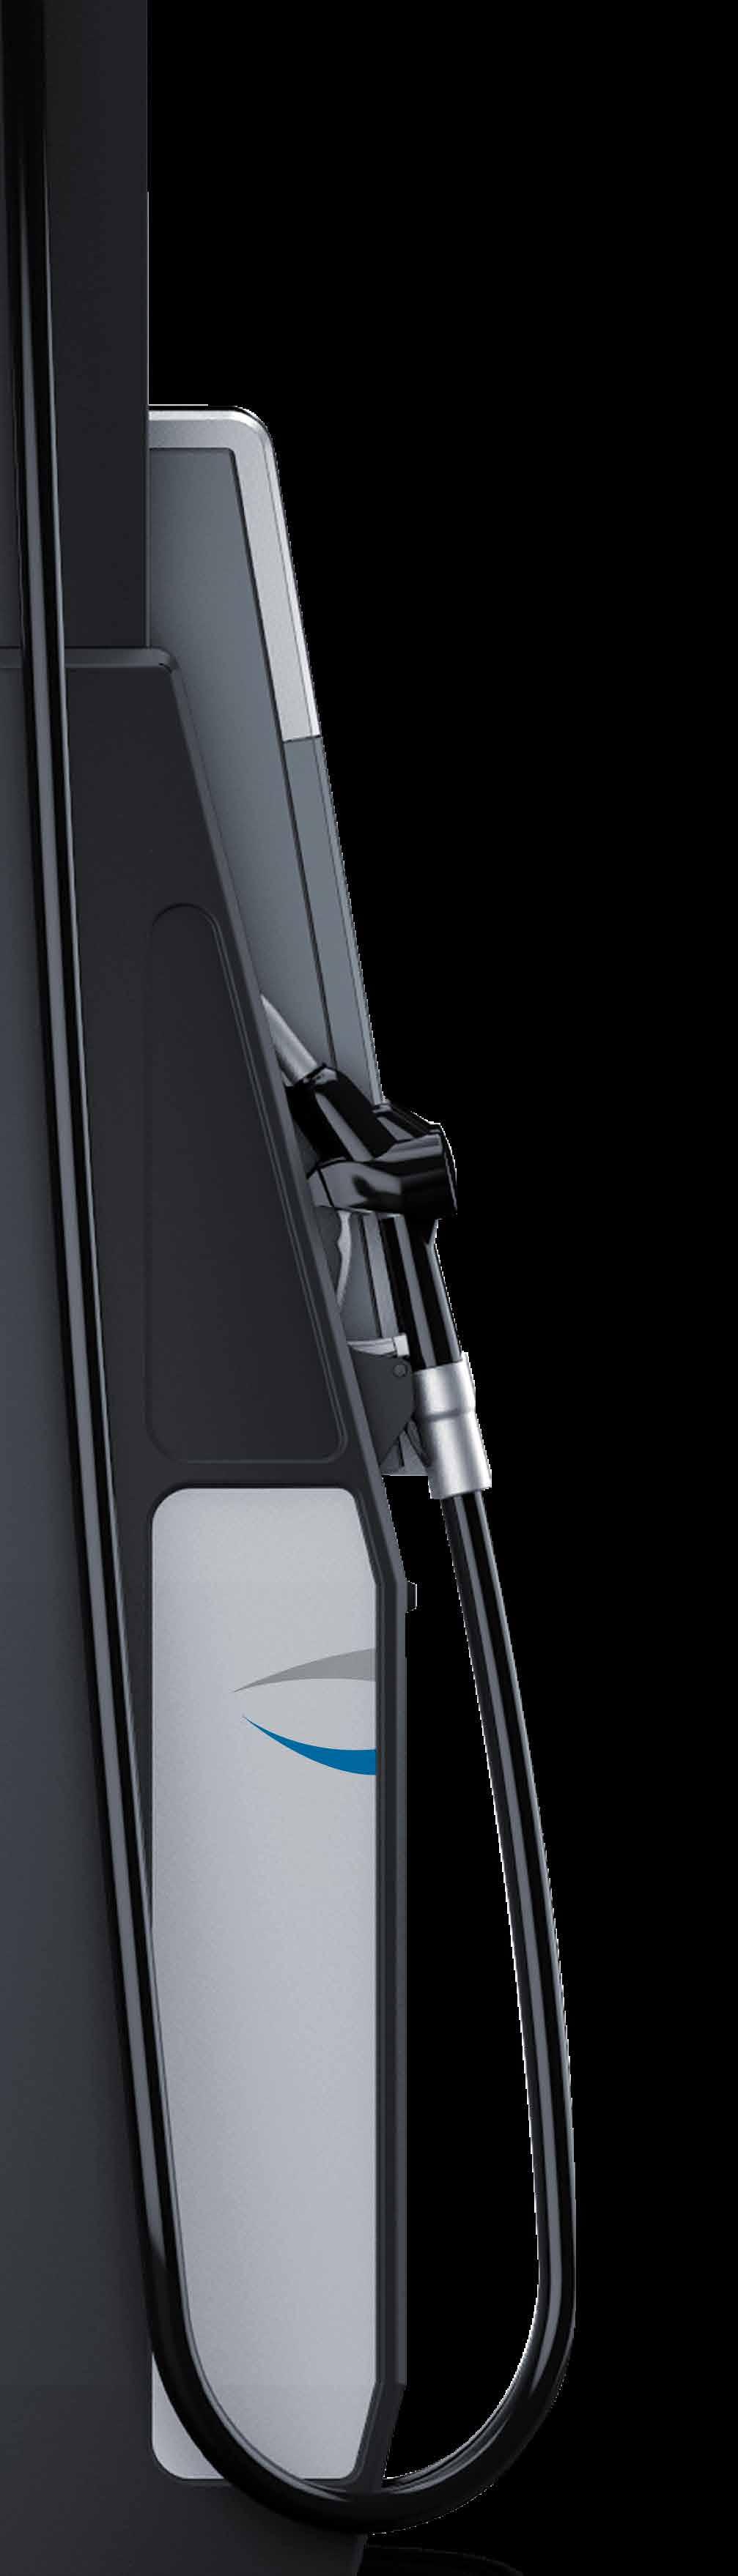 Engineered for the world. Helix is the first-ever global family of fuel dispensers, representing the best of everything Wayne has to offer.